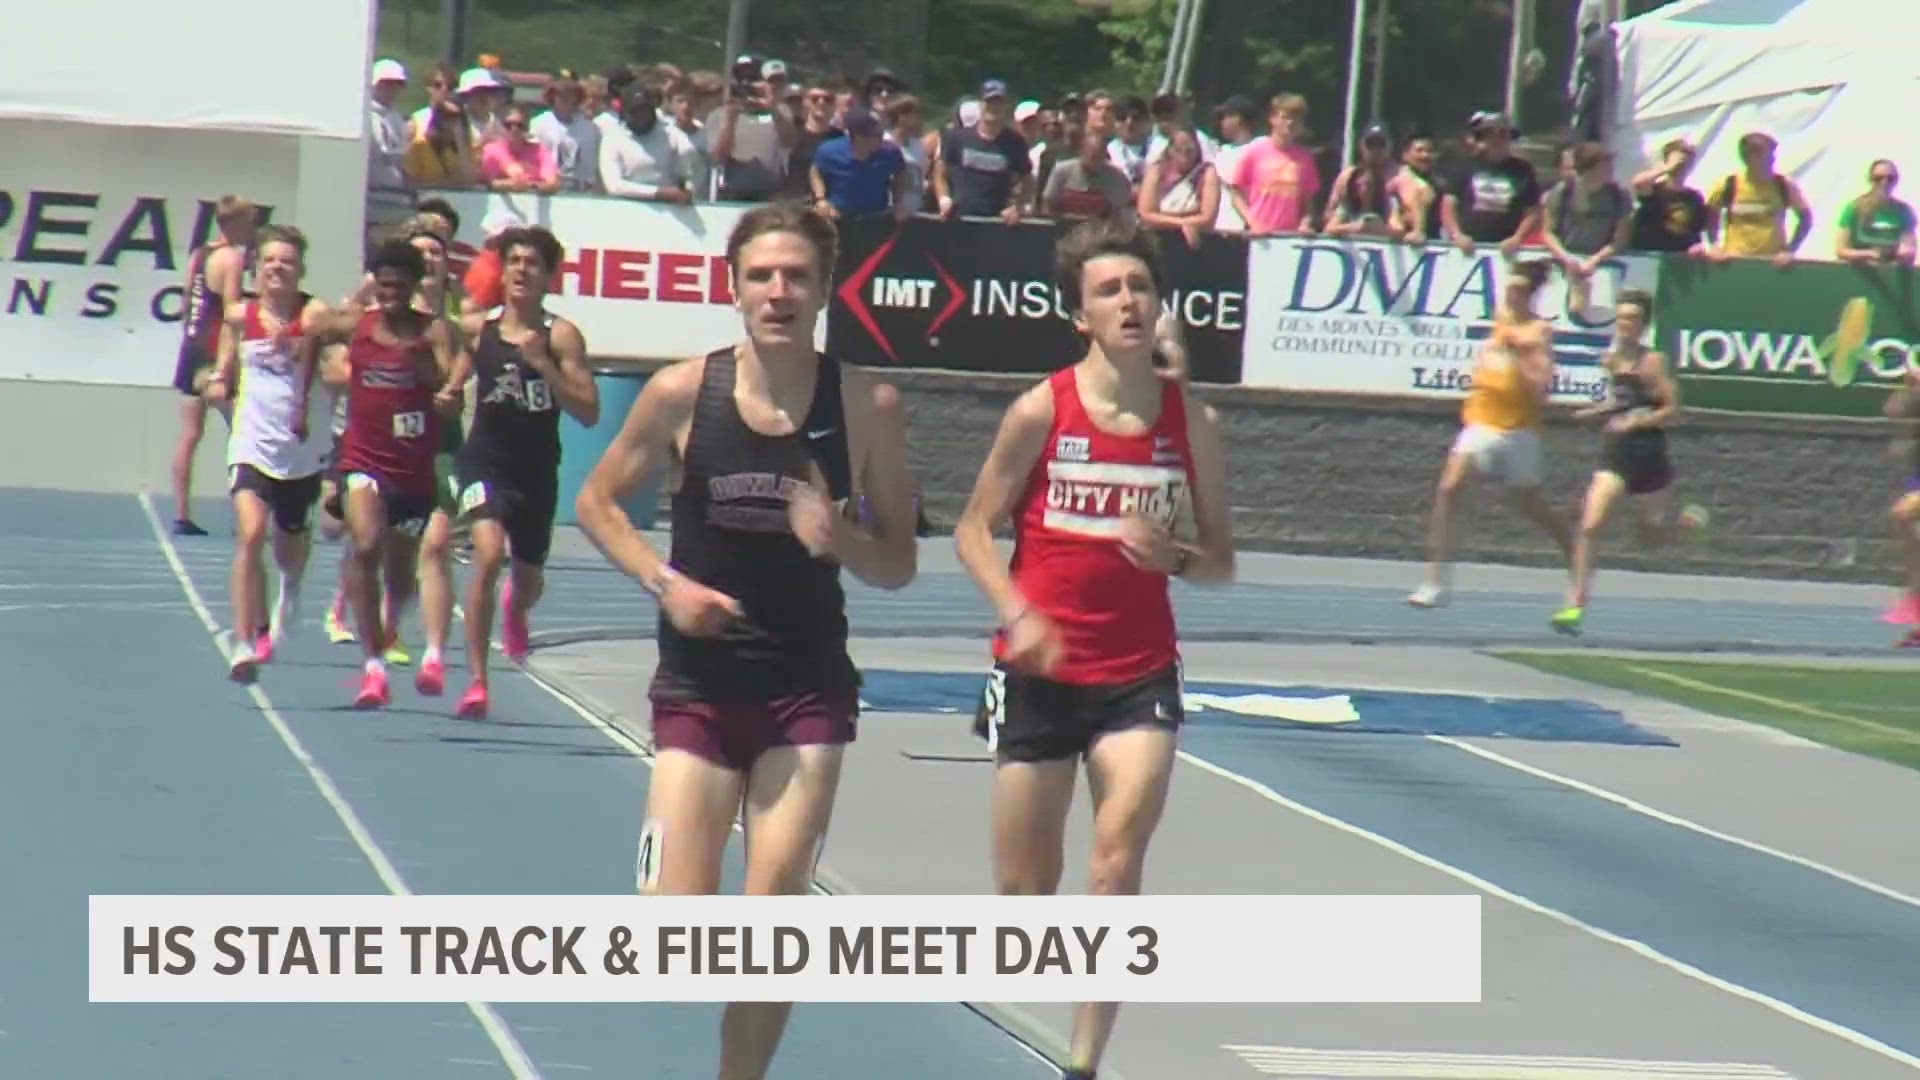 Plenty of central Iowa runners took home wins in the third and final day of the Iowa State Track & Field tournament. For a full list of winners, visit weareiowa.com.